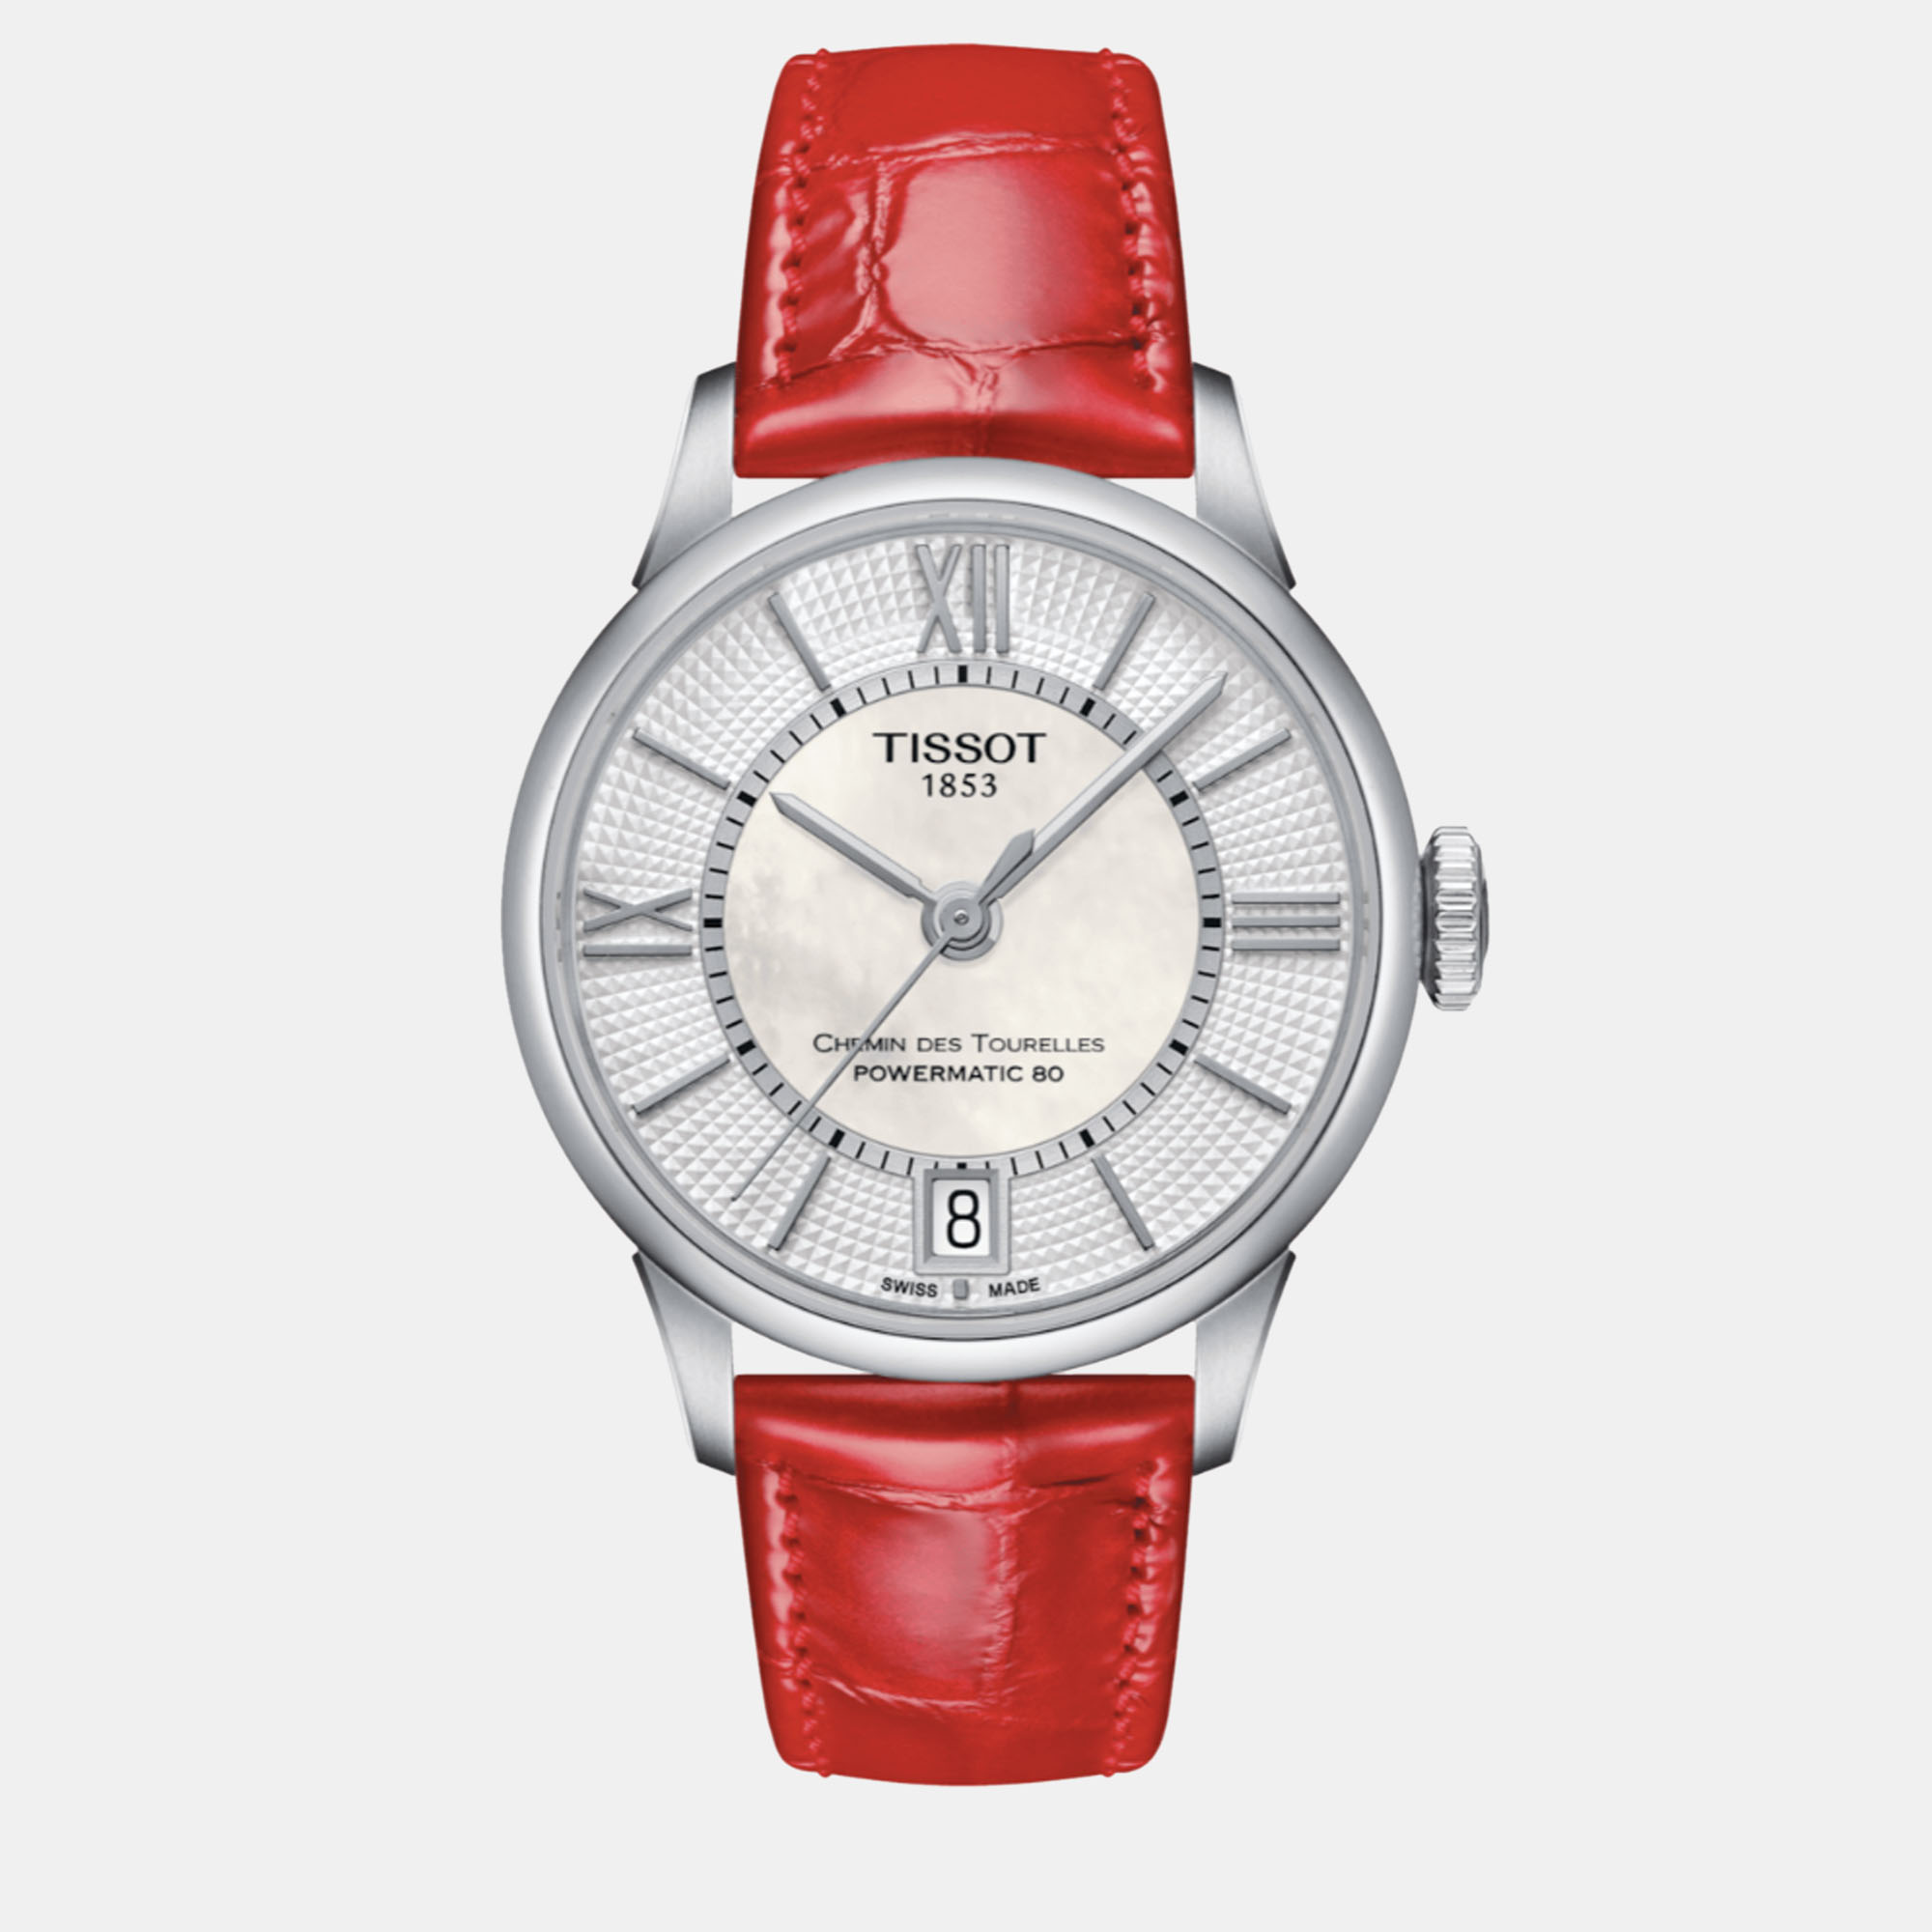 Tissot red leather watch 32 mm